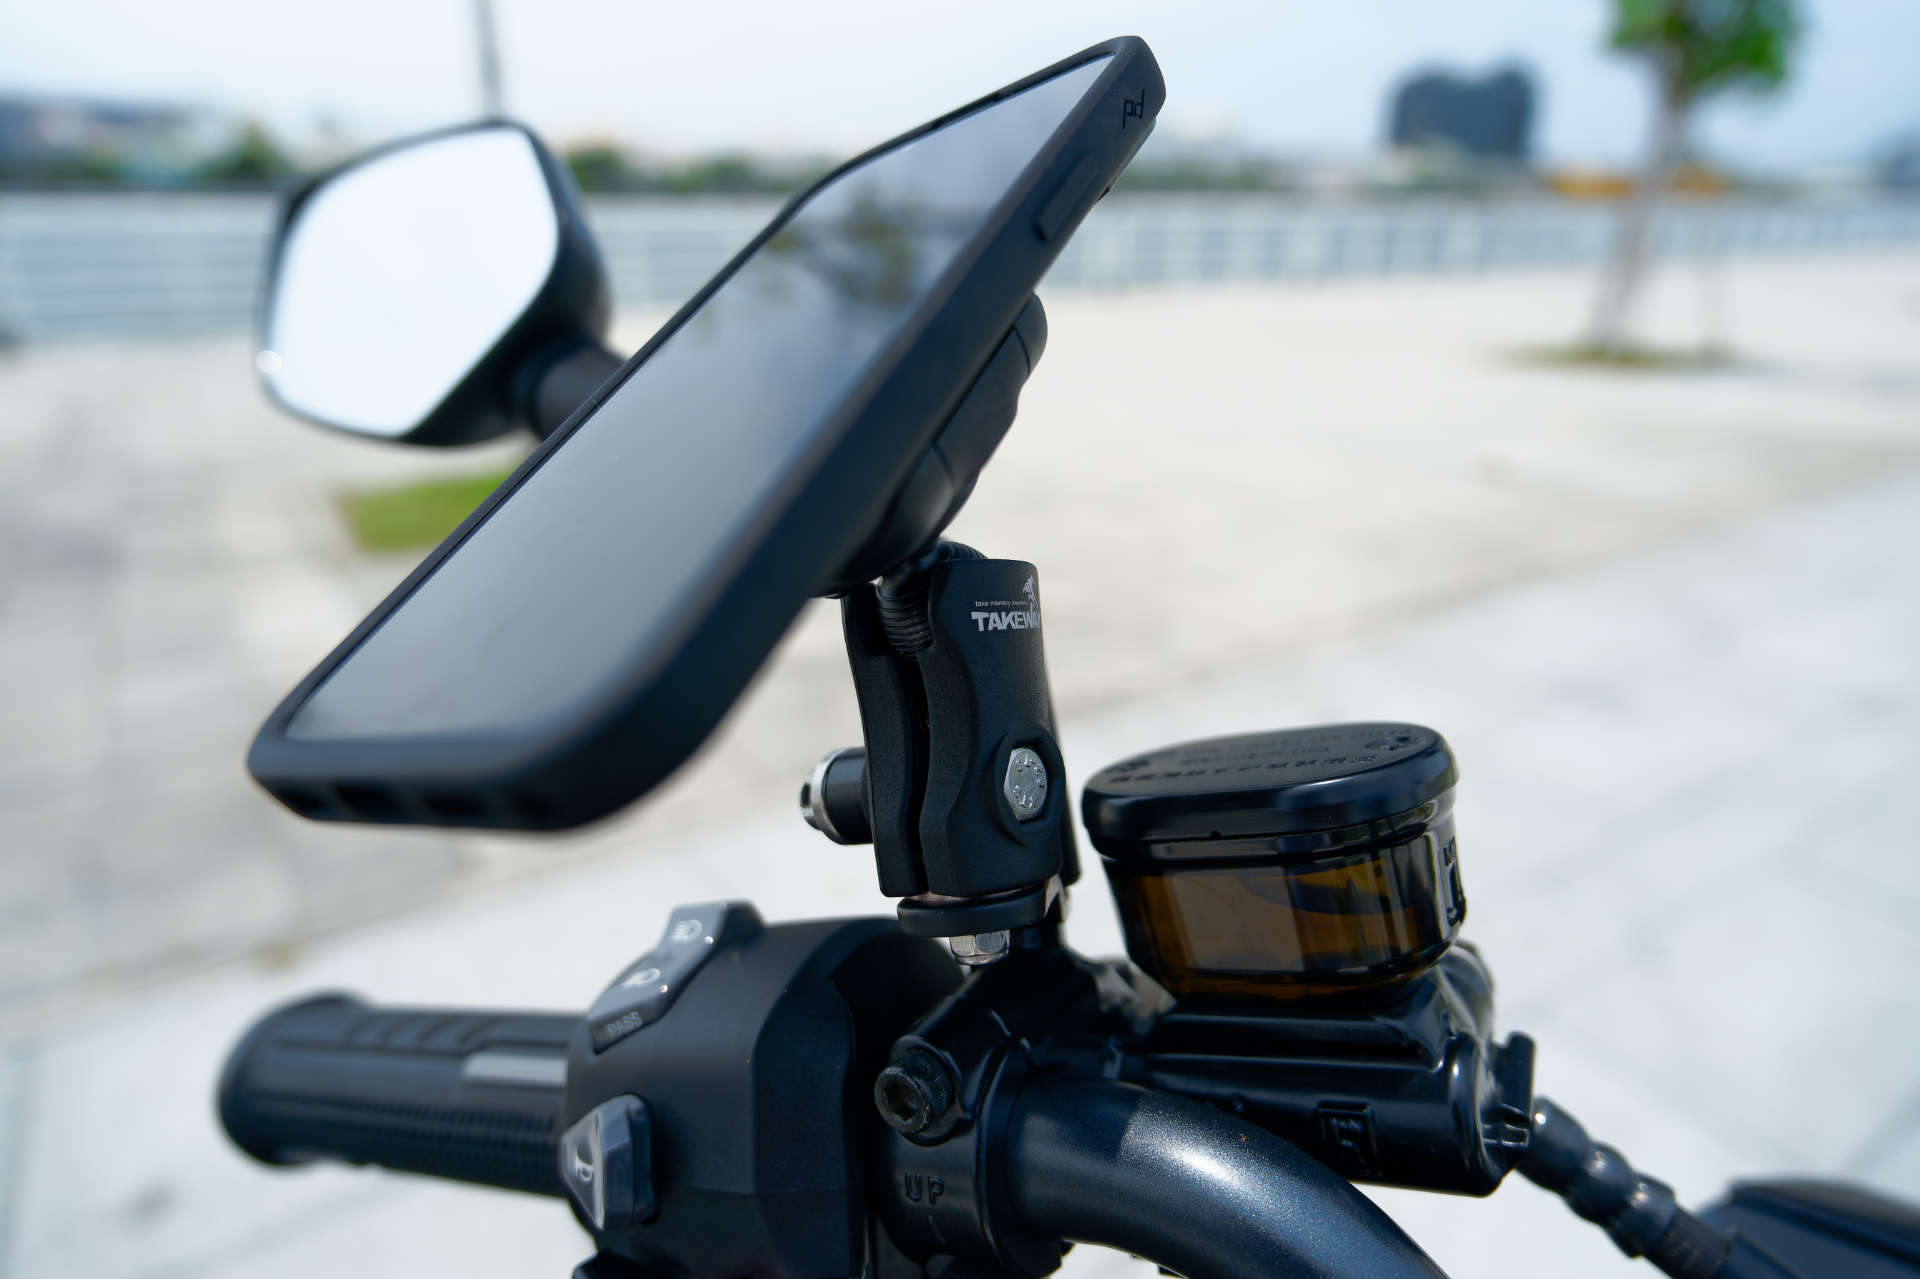 A mobile phone attached to a Peak Design ball mount adapter, held in place by a Takeway-branded base structure on the handle of a motorcycle.